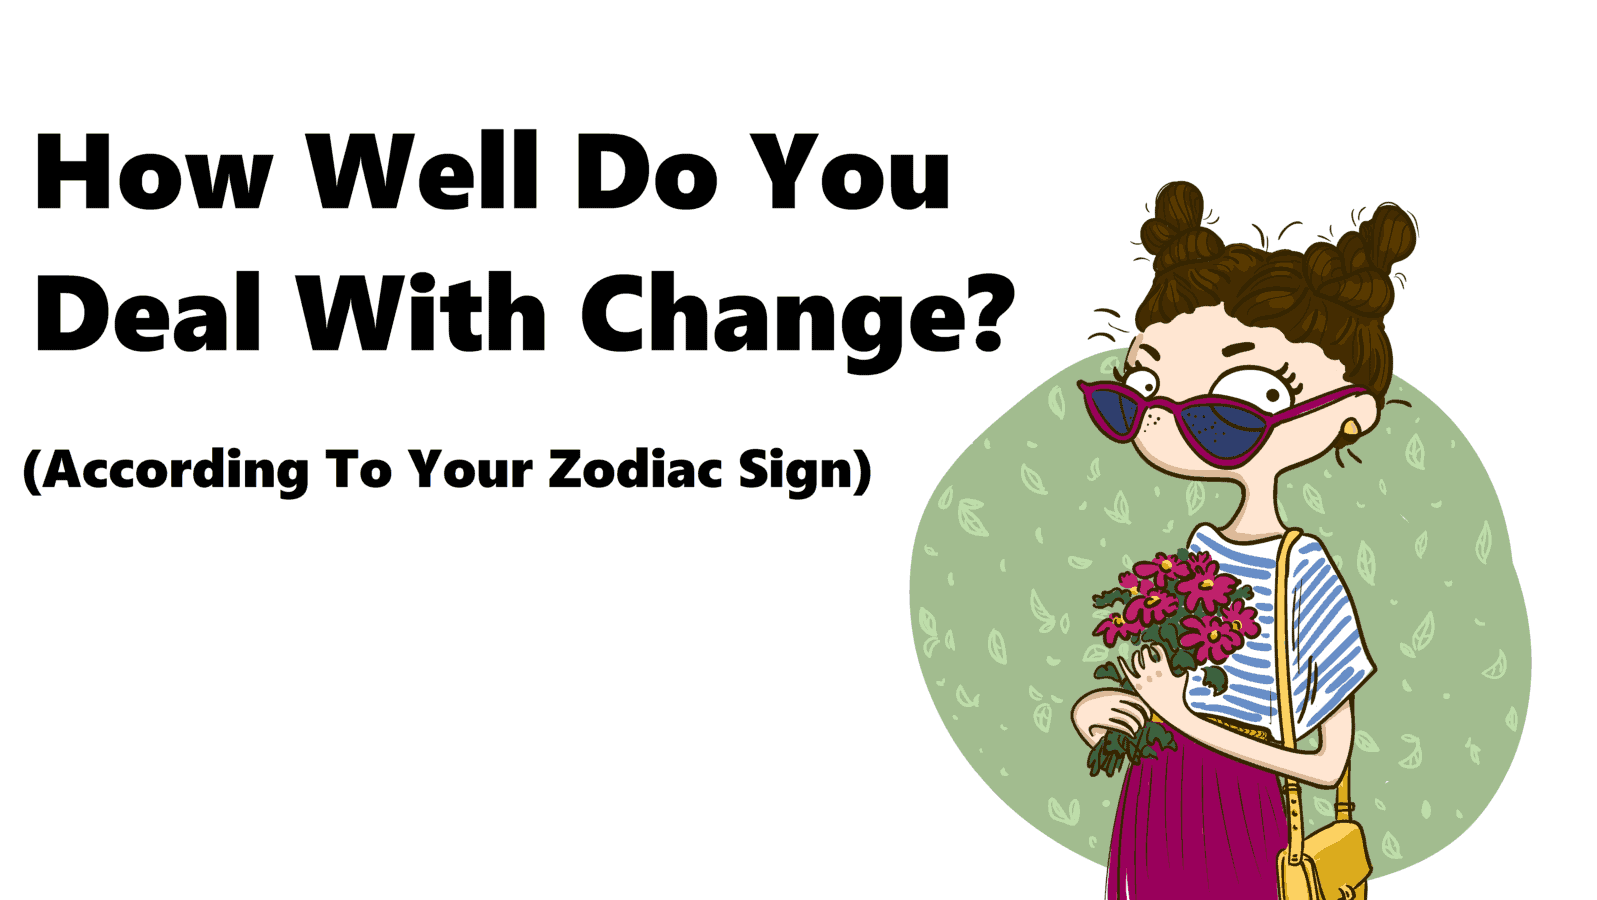 How Well Do You Deal With Change According To Your Zodiac Sign?